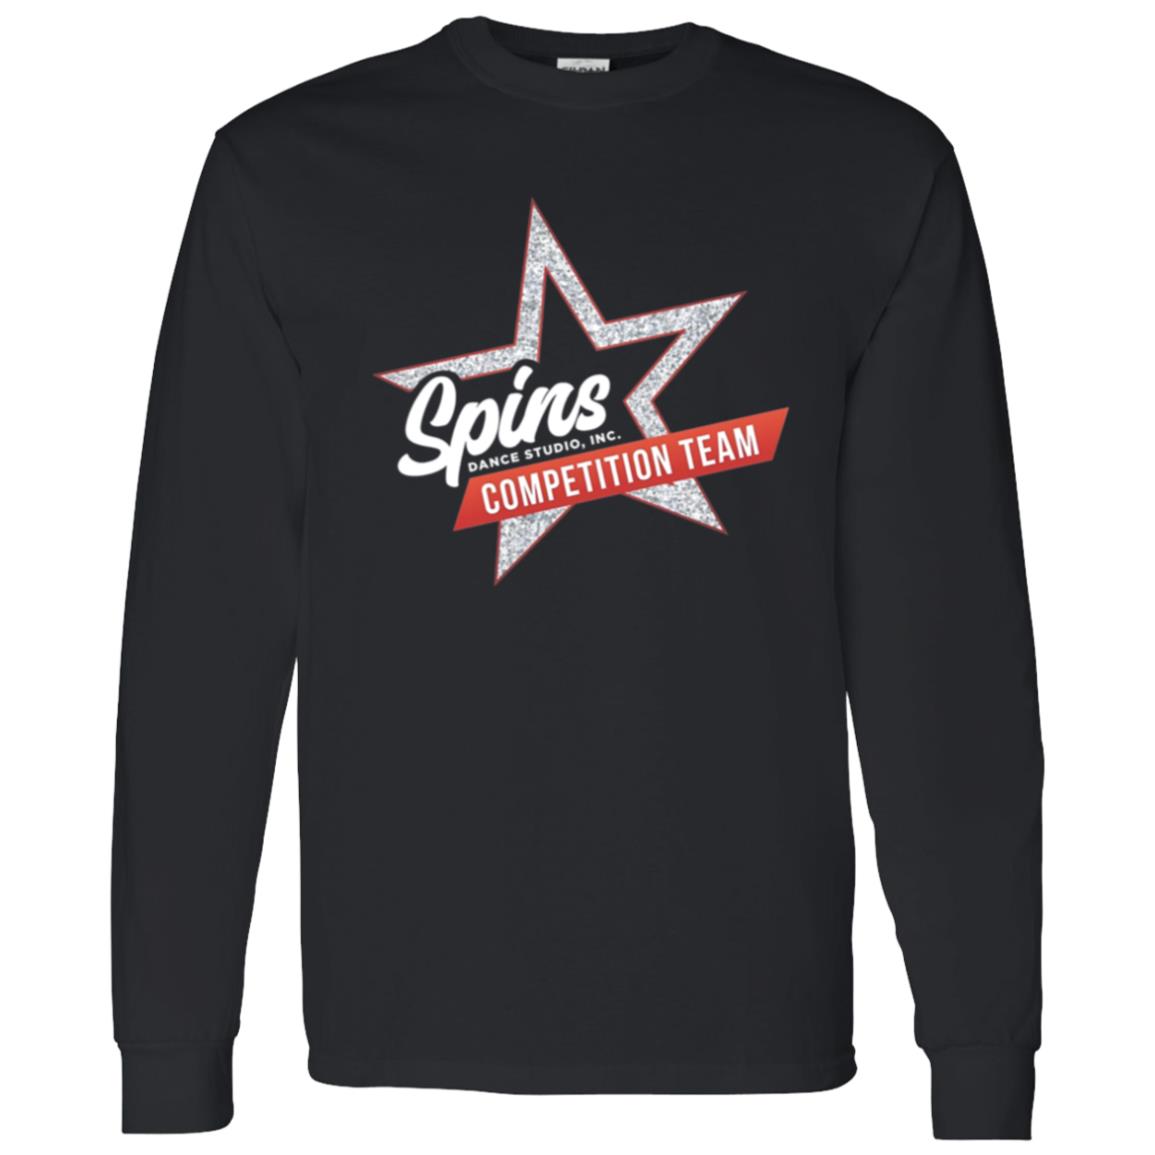 Spins Competition Team Long Sleeve T-Shirts